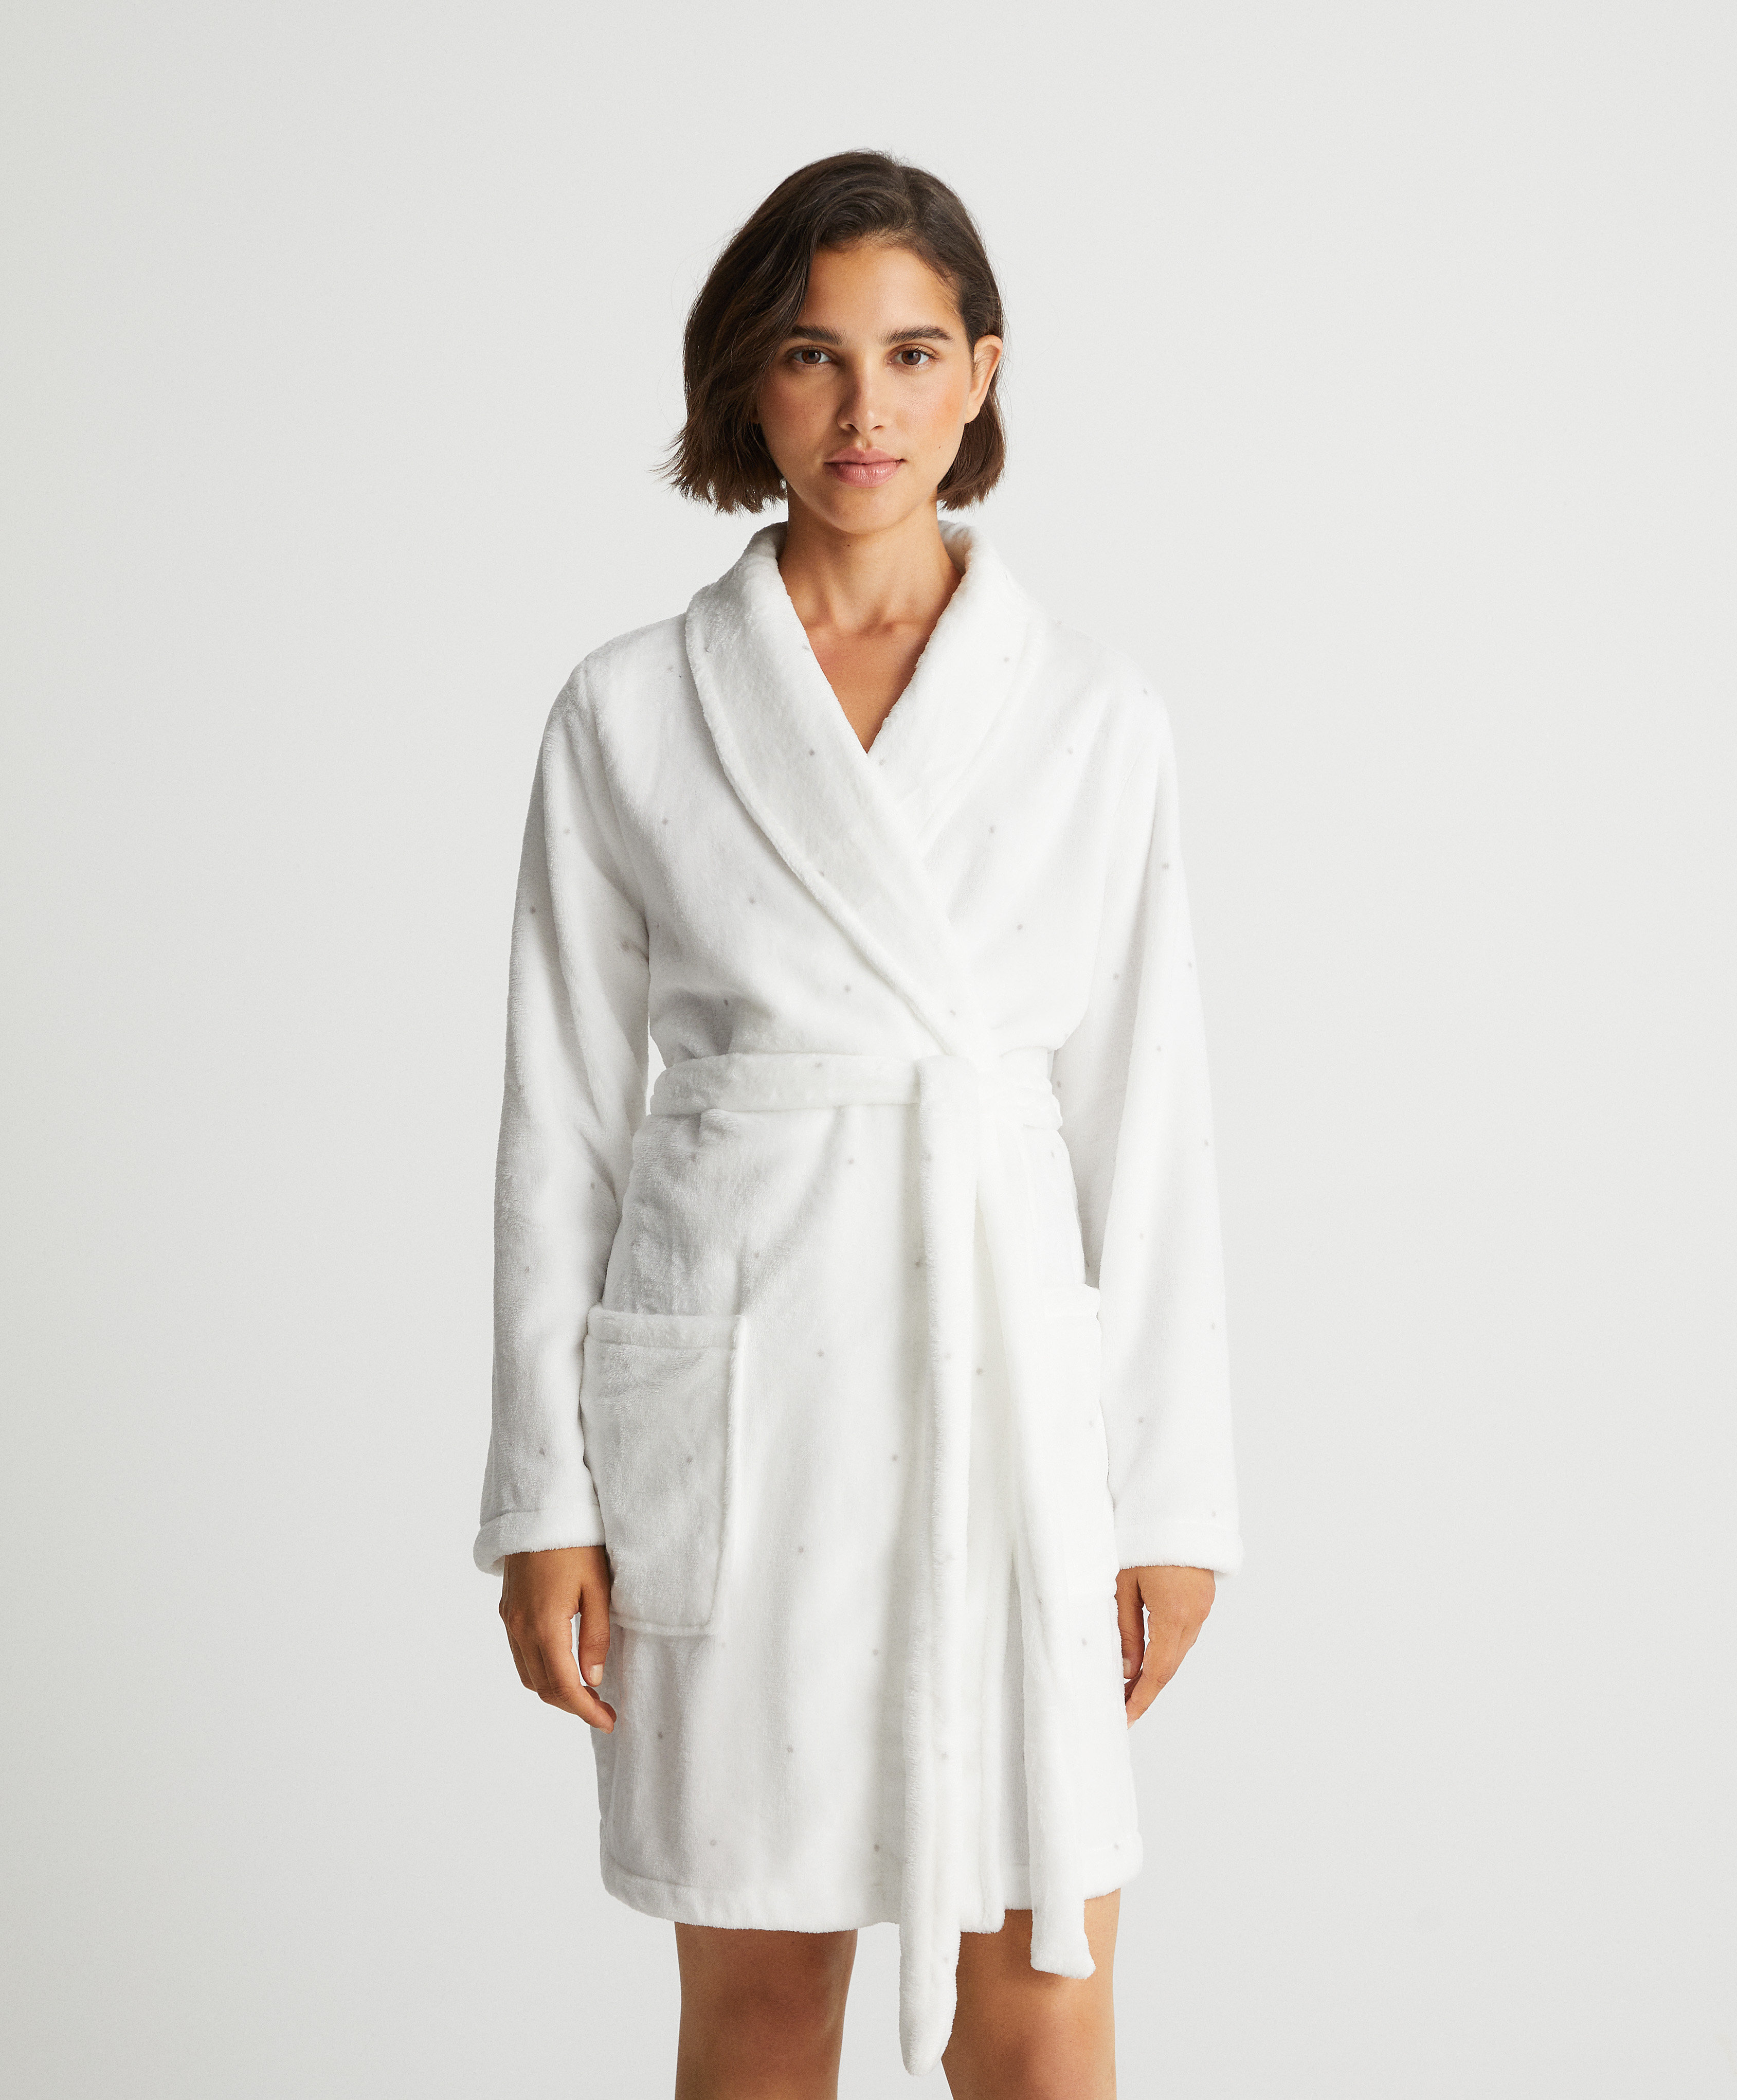 Soft touch printed fleece dressing gown